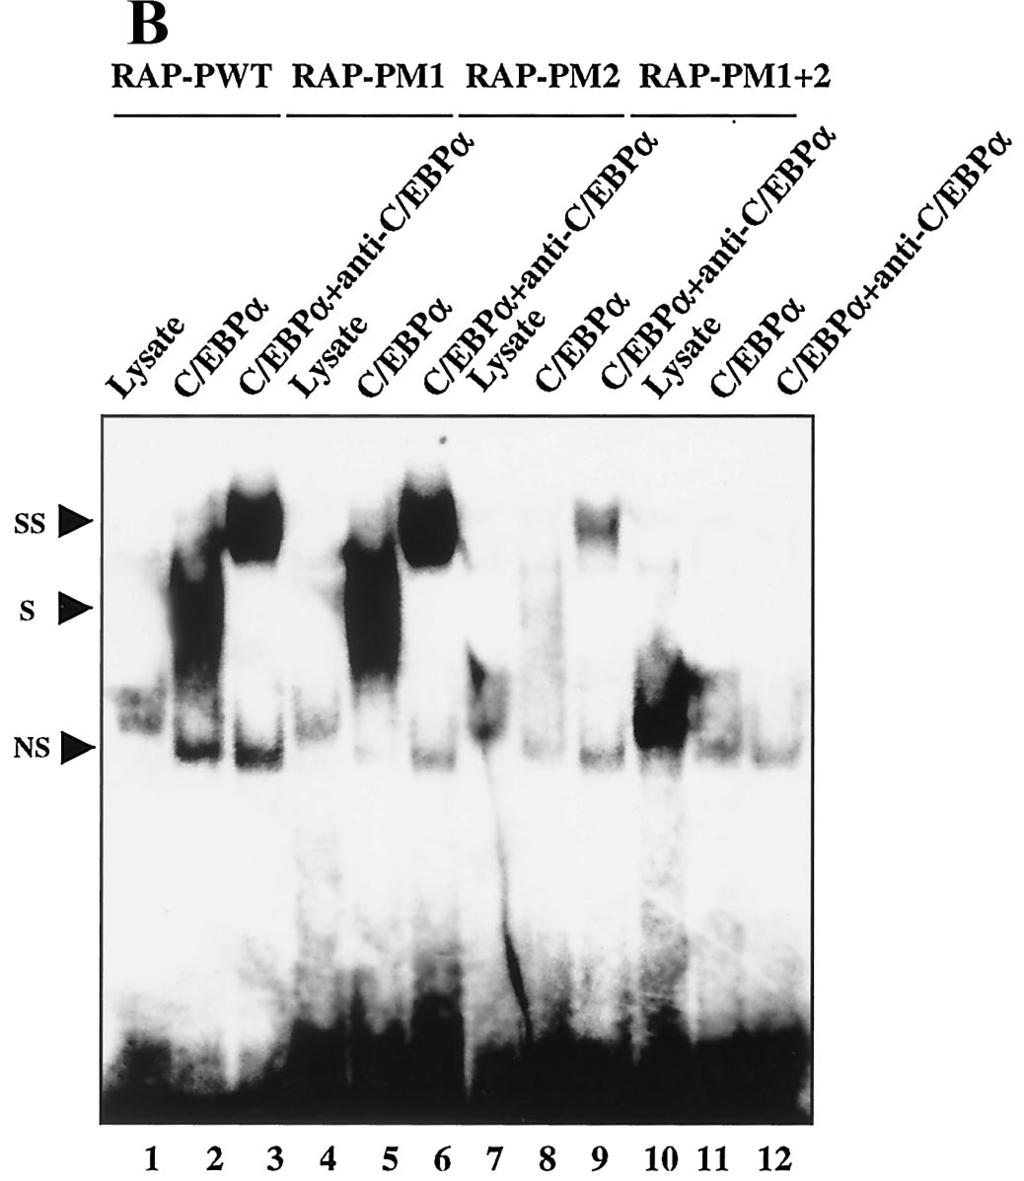 (B) EMSA experiment showing that in vitro-translated C/EBP bound strongly to a synthetic 32 P-labeled oligonucleotide probe containing the C/EBP-II motif but only weakly to the more distal C/EBP-I